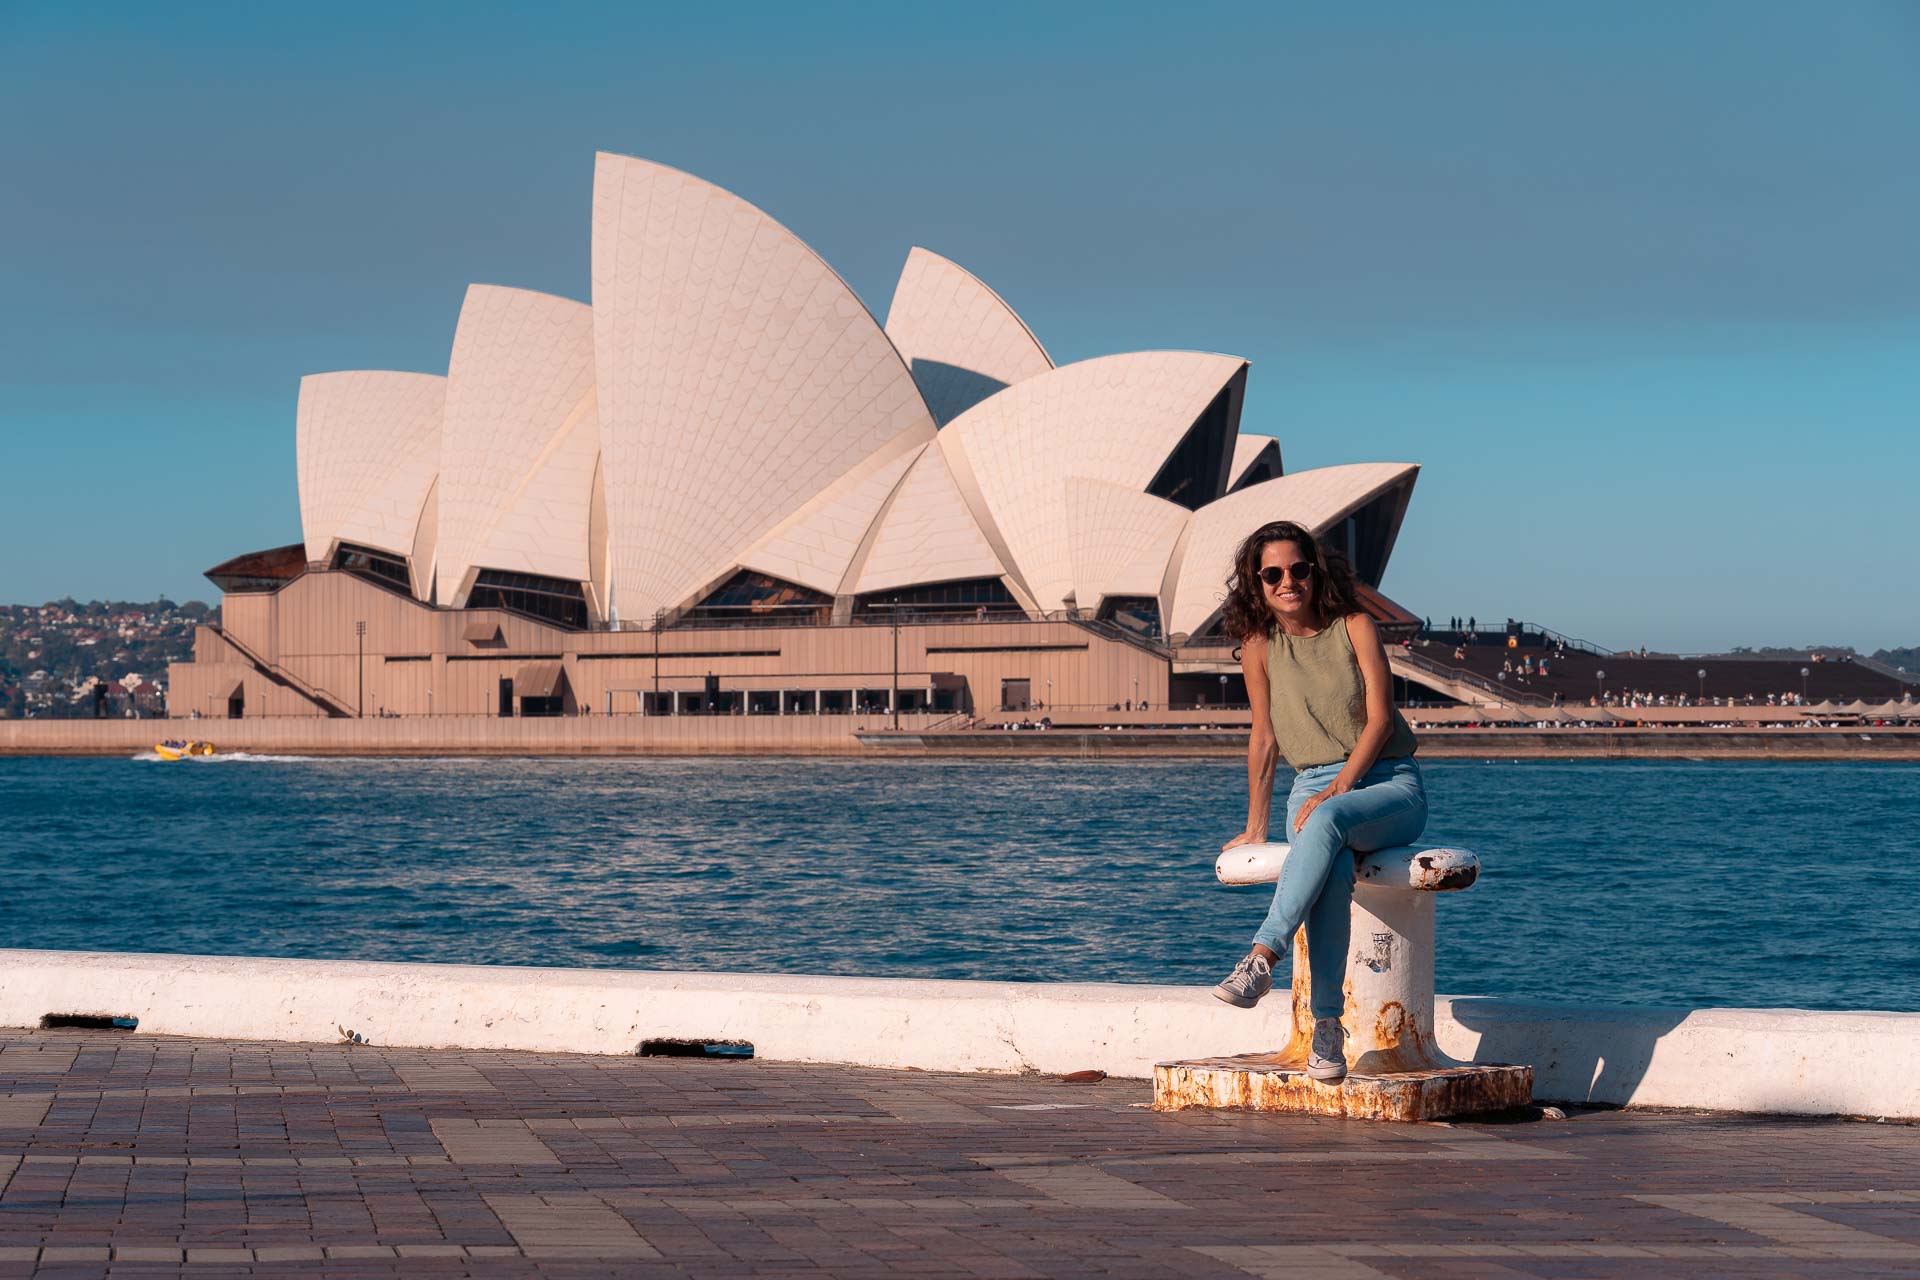 Fernanda sitting in front of the Sydney Opera House on the other side of the canal 